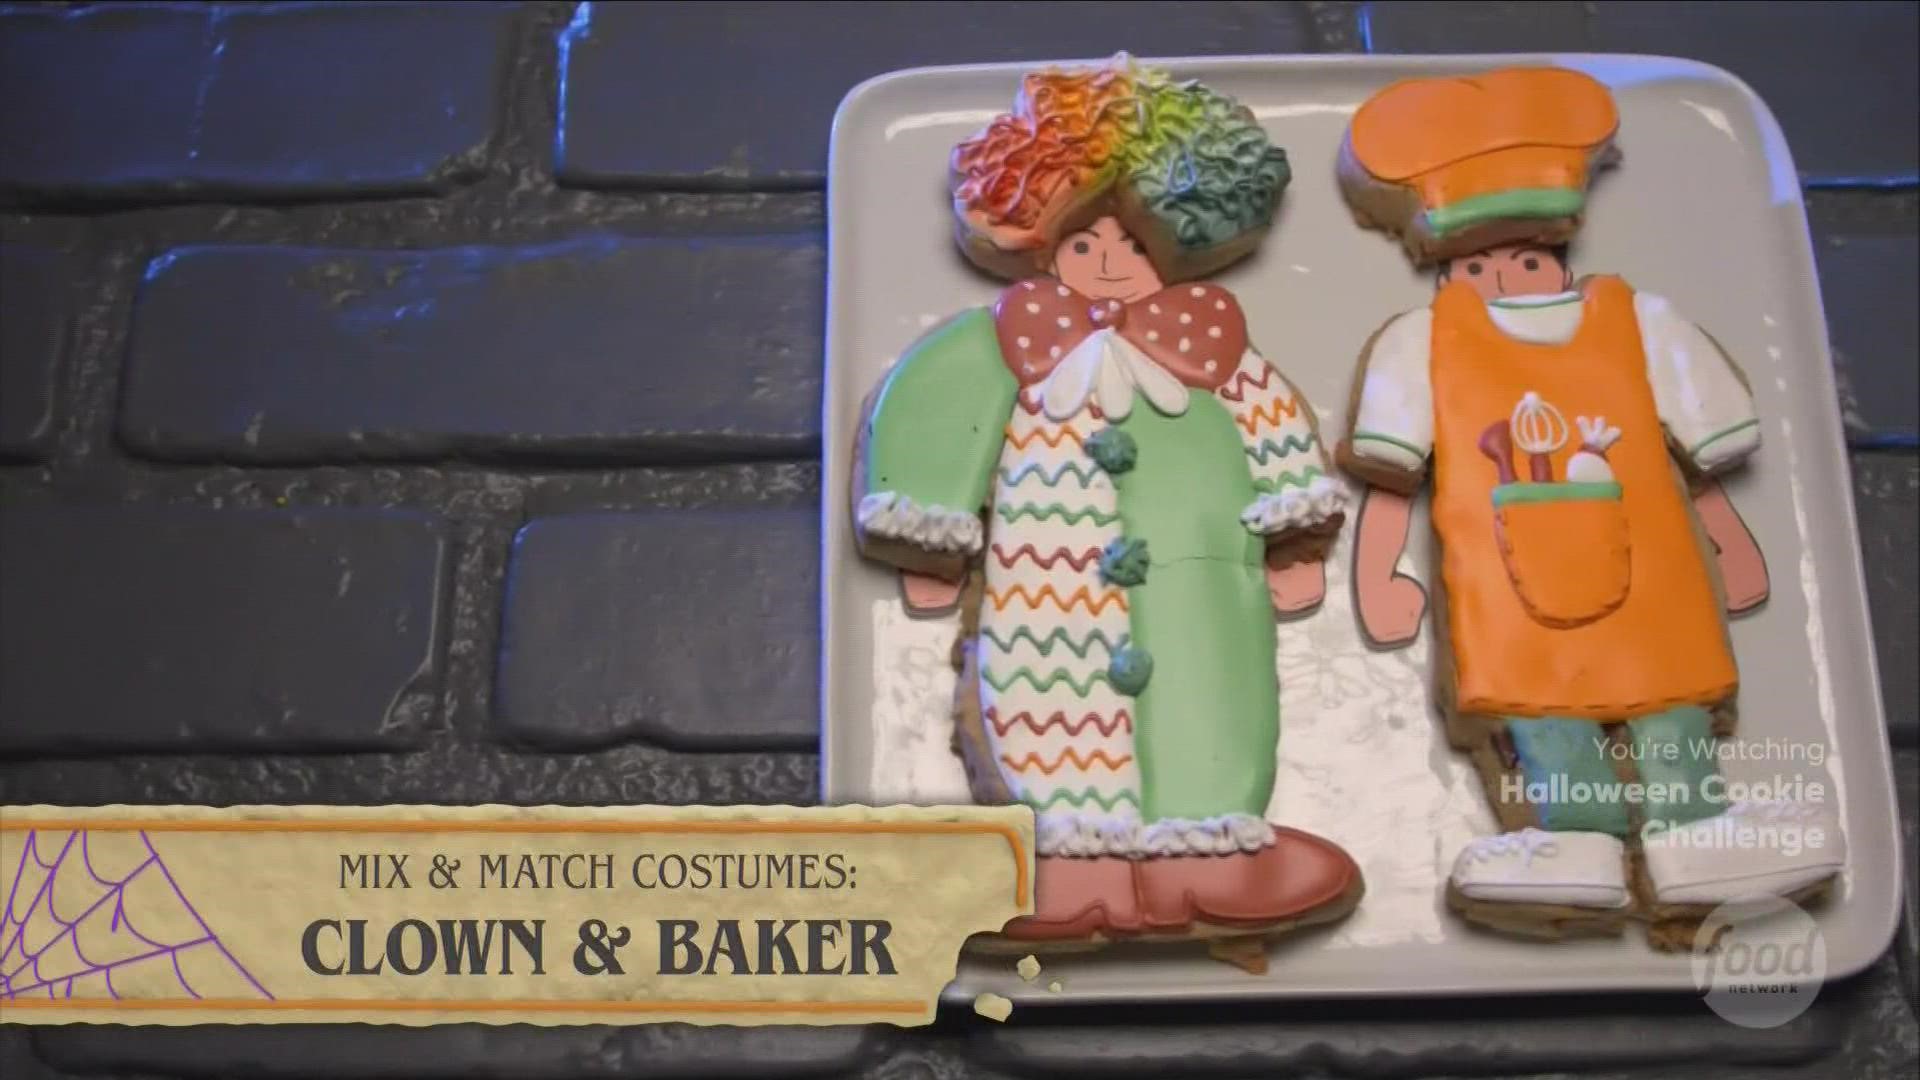 Brian Muffoletto represented the Bakers Men in the episode, making Halloween costumes out of cookie.